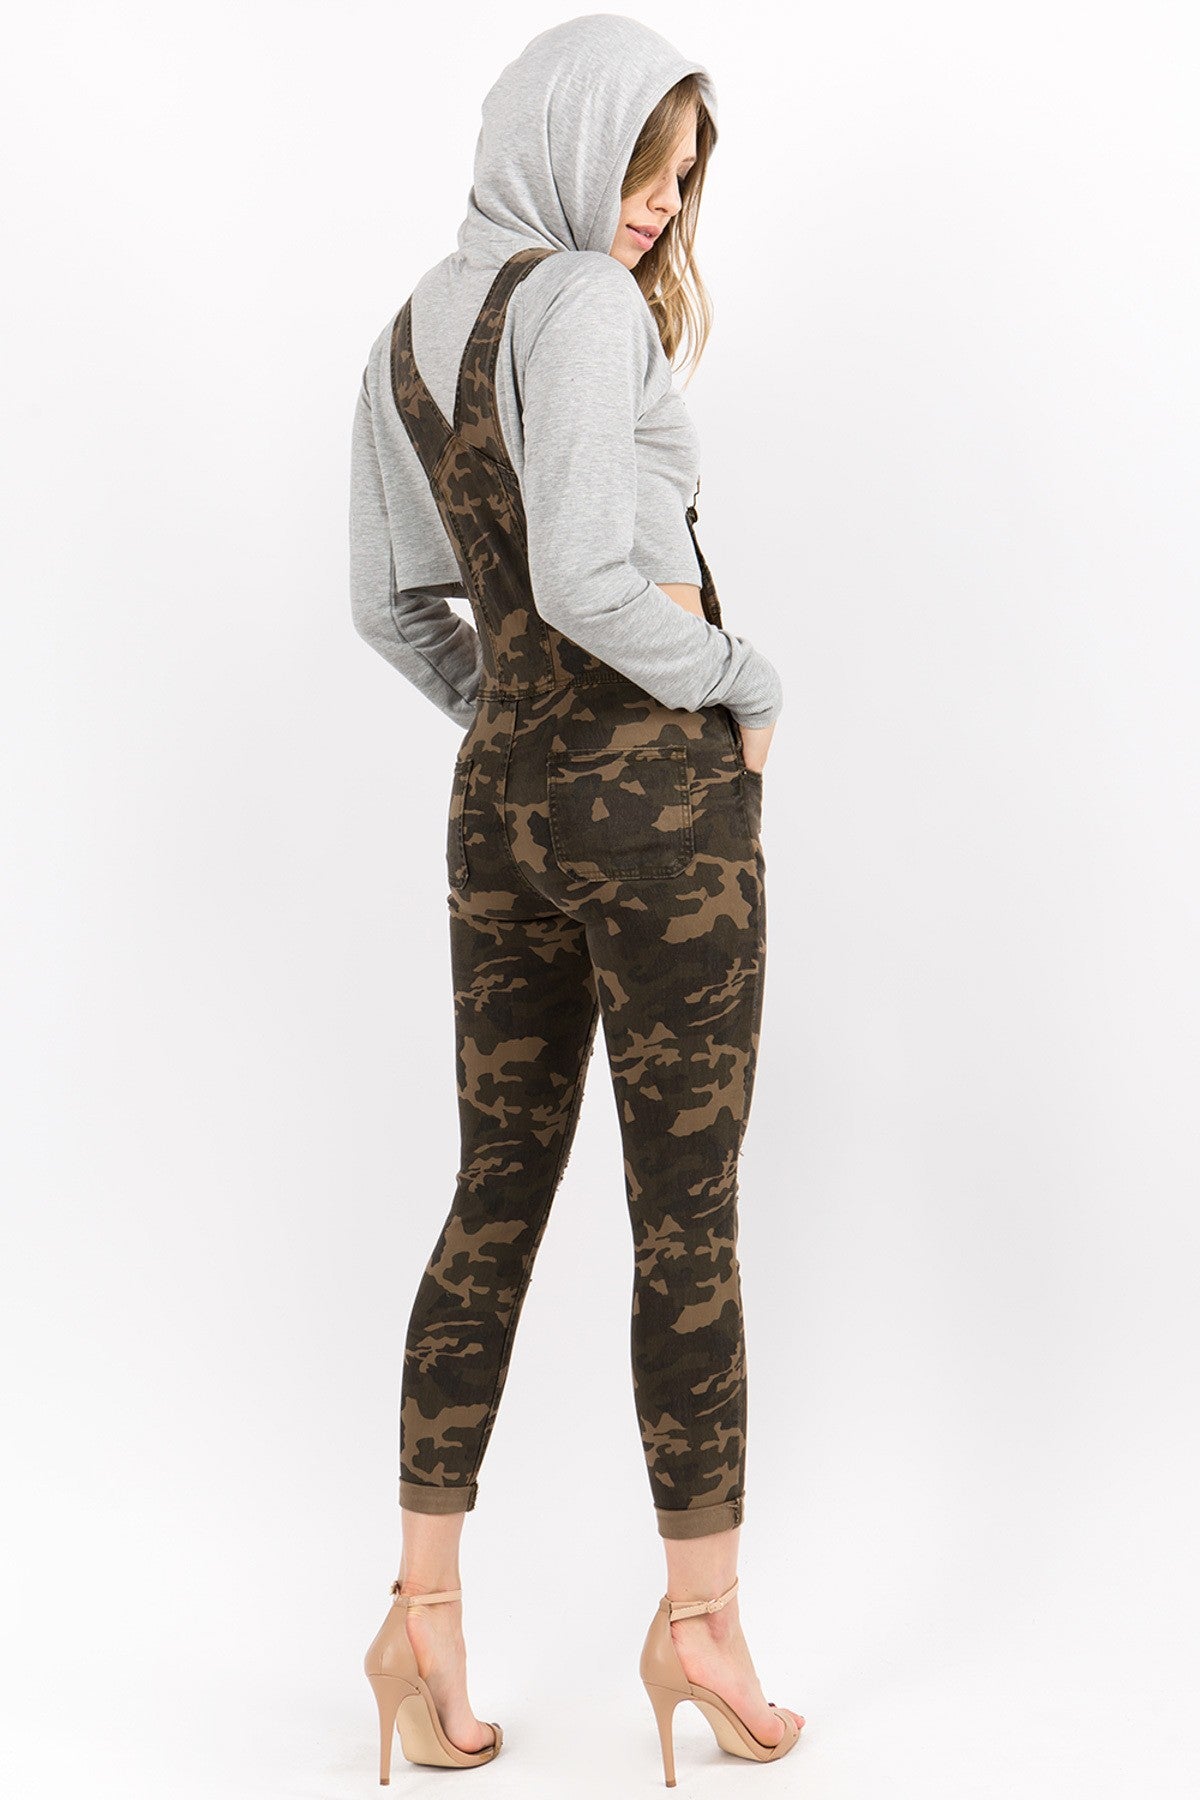 Camo Distressed Overall Bibs - jumpsuit